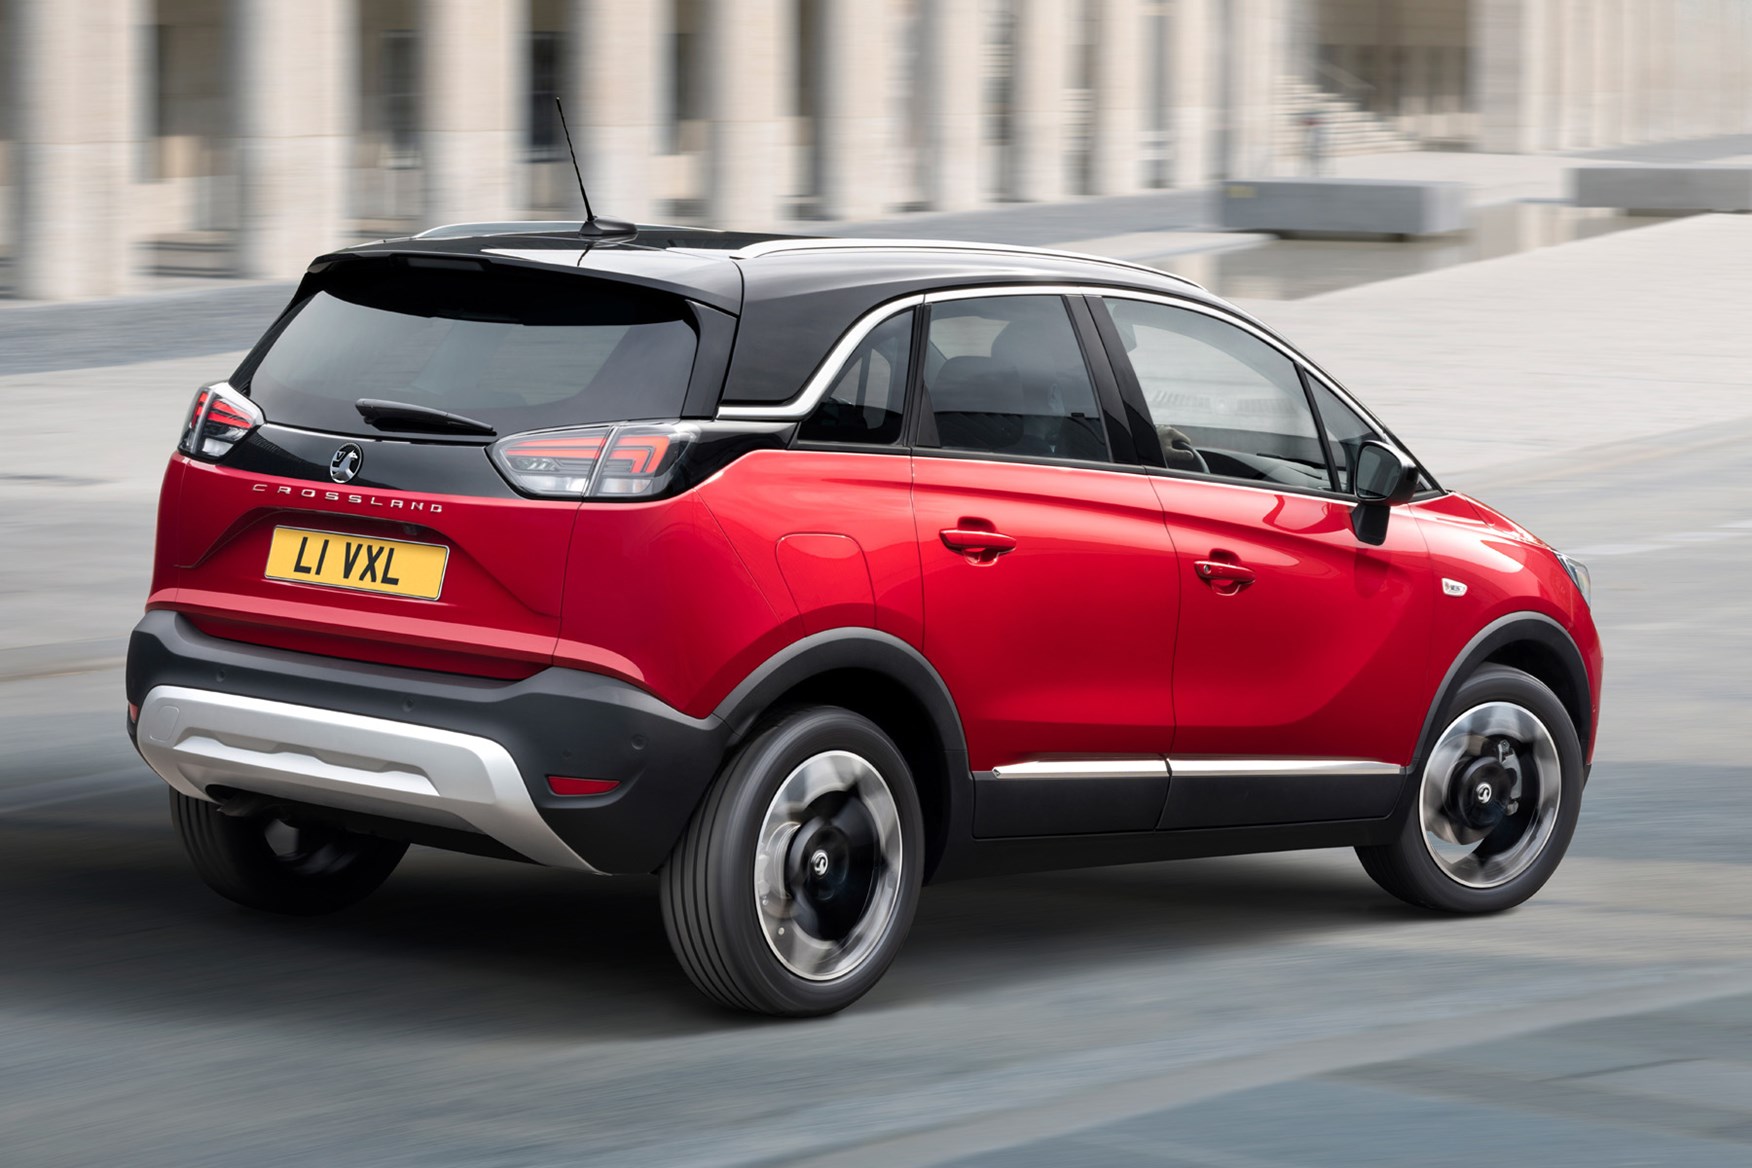 Buy, lease or finance a vauxhall crossland from osv: Vauxhall Crossland SUV pricing announced | Parkers